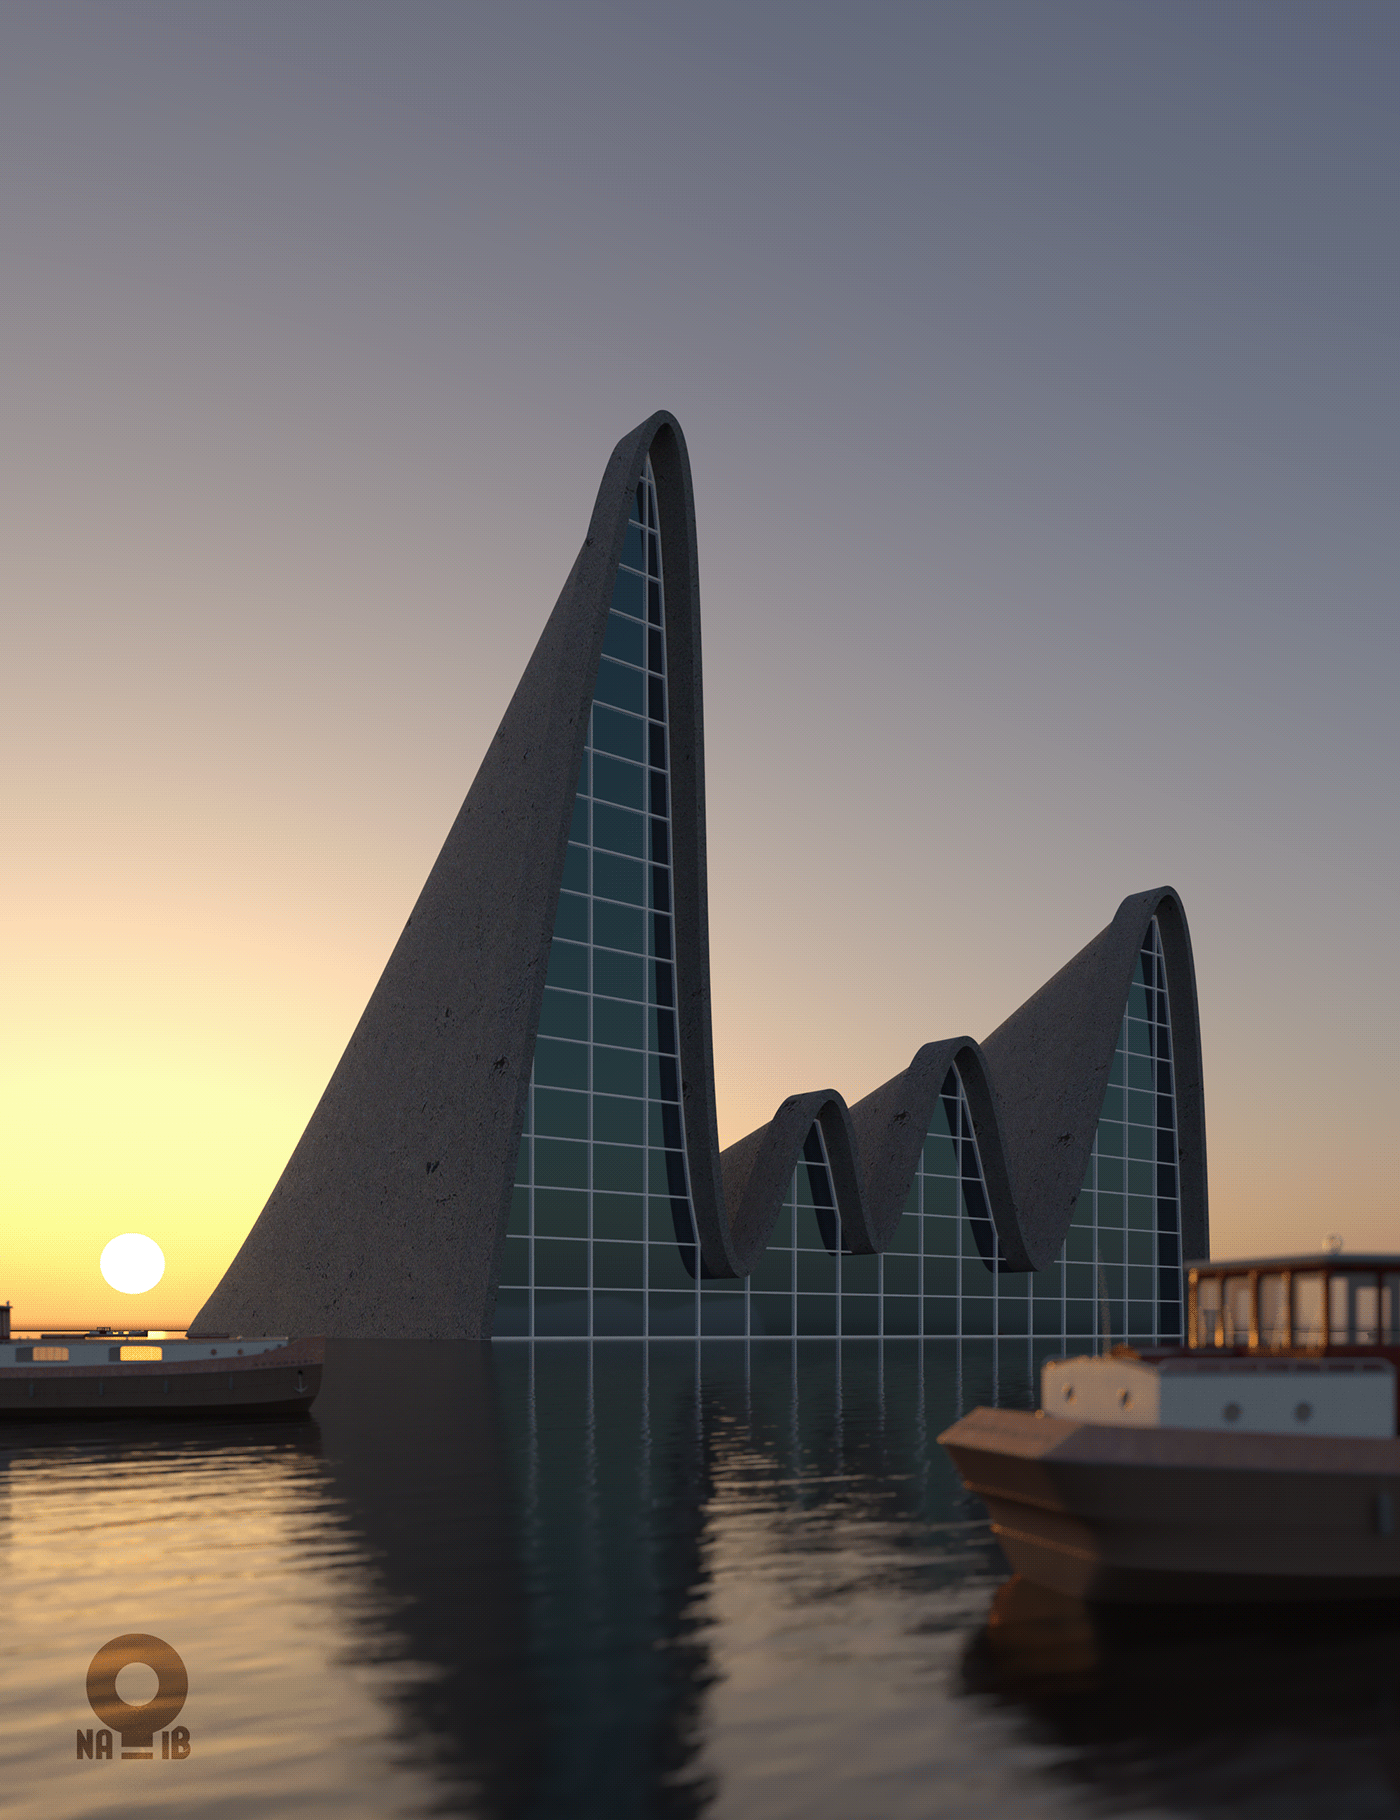 3ds max architecture Nature organic rendering SKY Sun sunset V-ray water